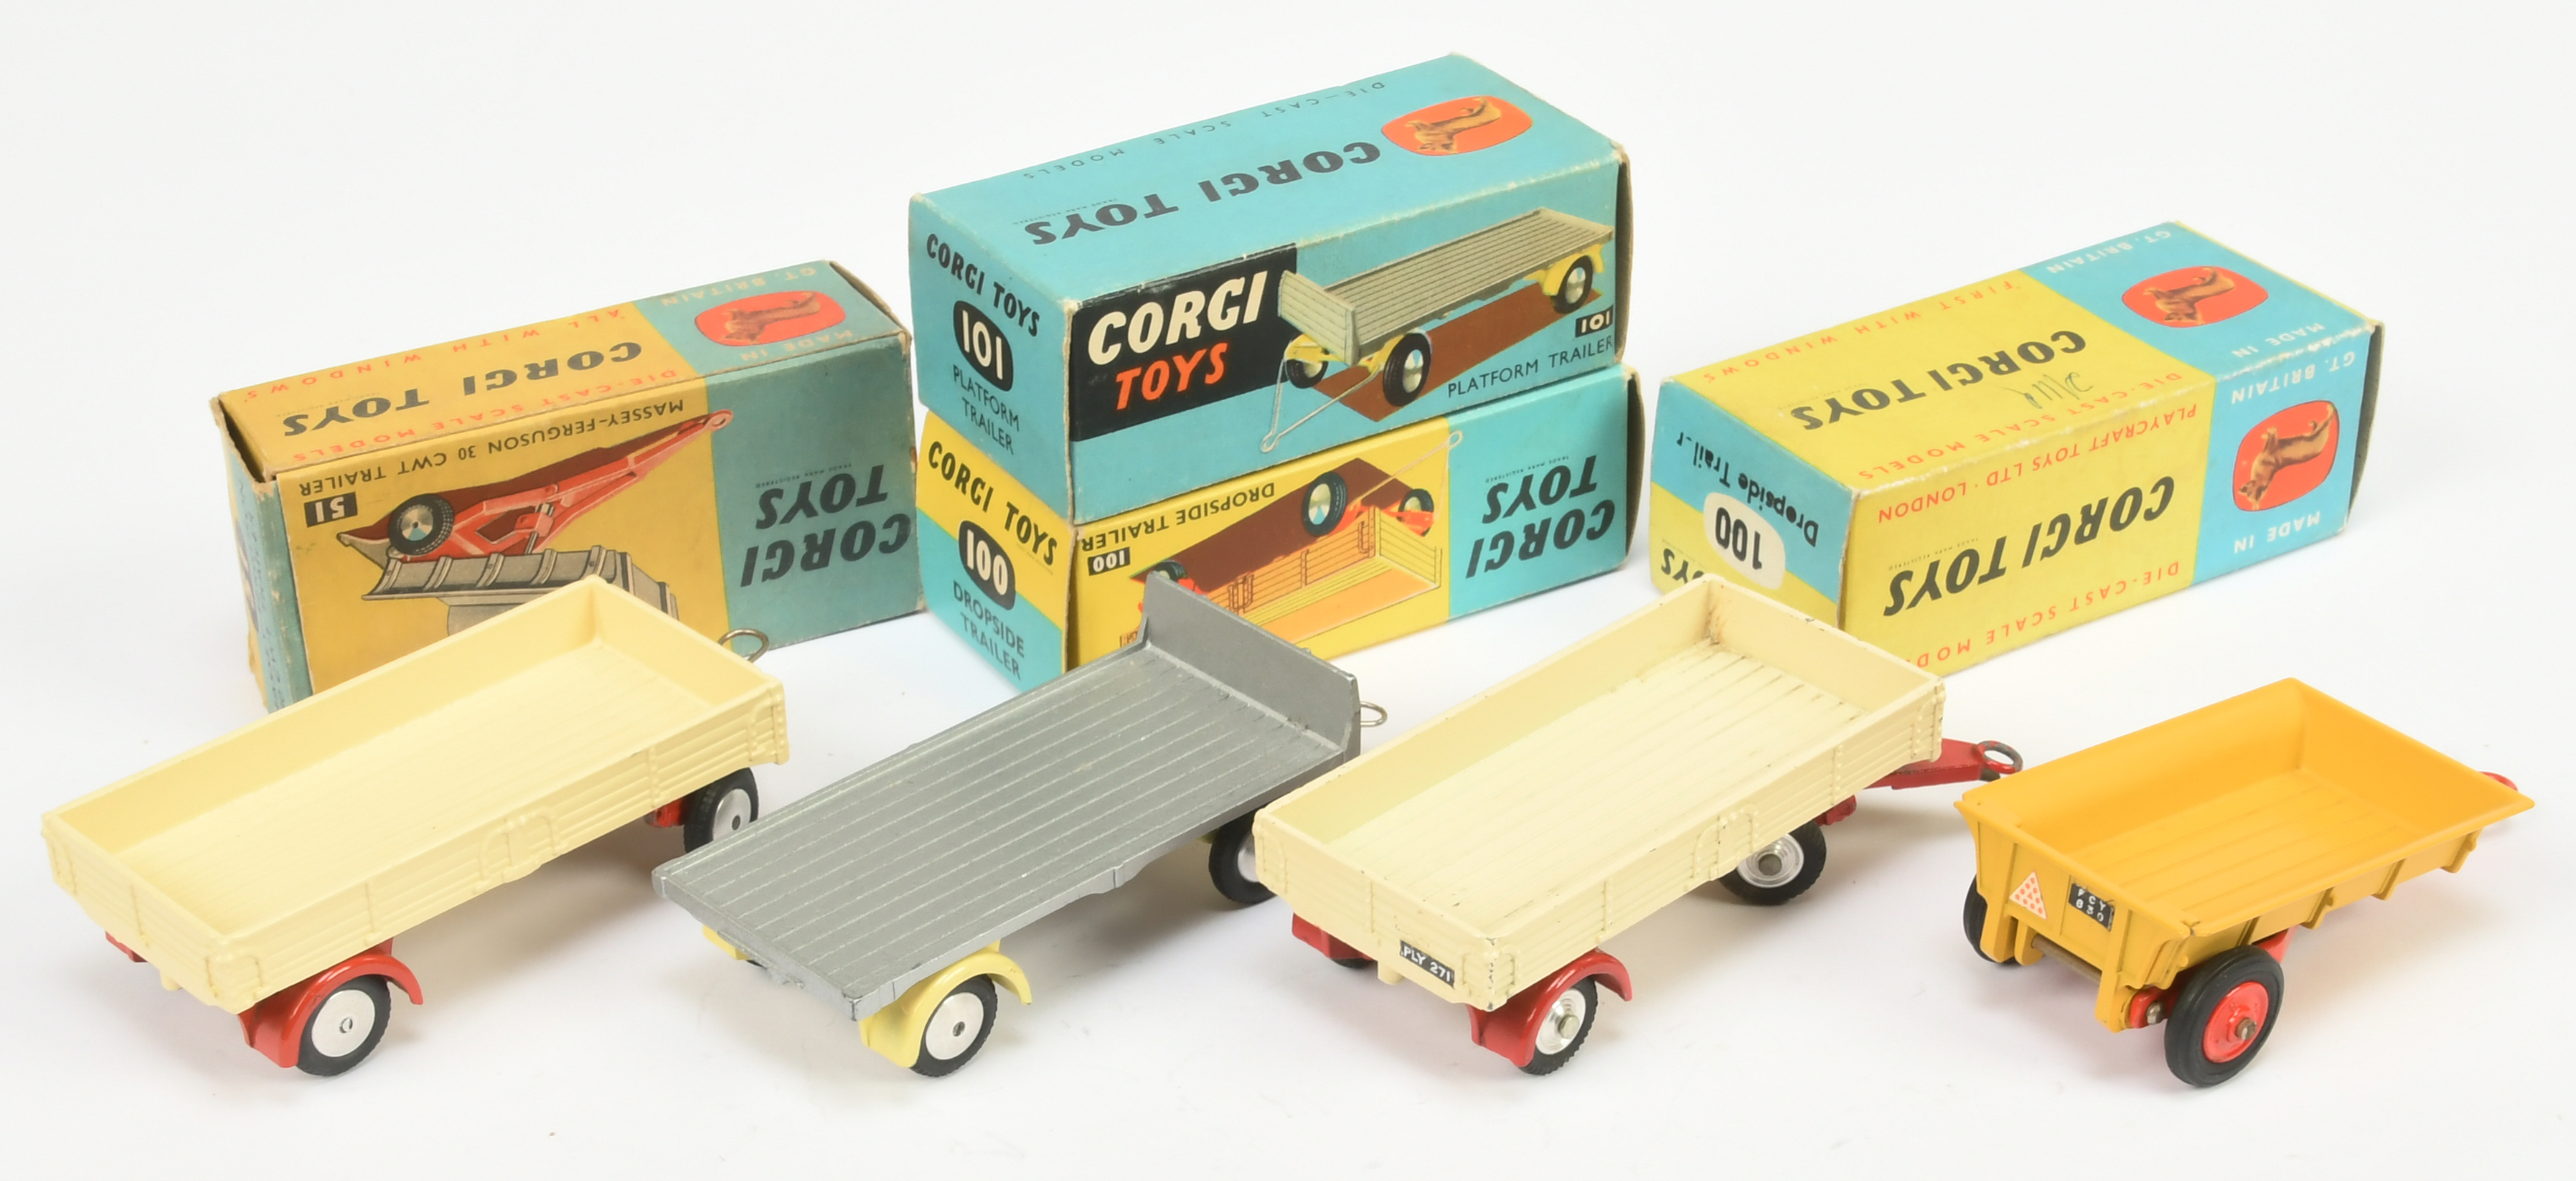 Corgi Toys Group Of Trailers - (1) 51 Massey Ferguson - Yellow and Red, (2) 100 Dropside - Cream ... - Image 2 of 2